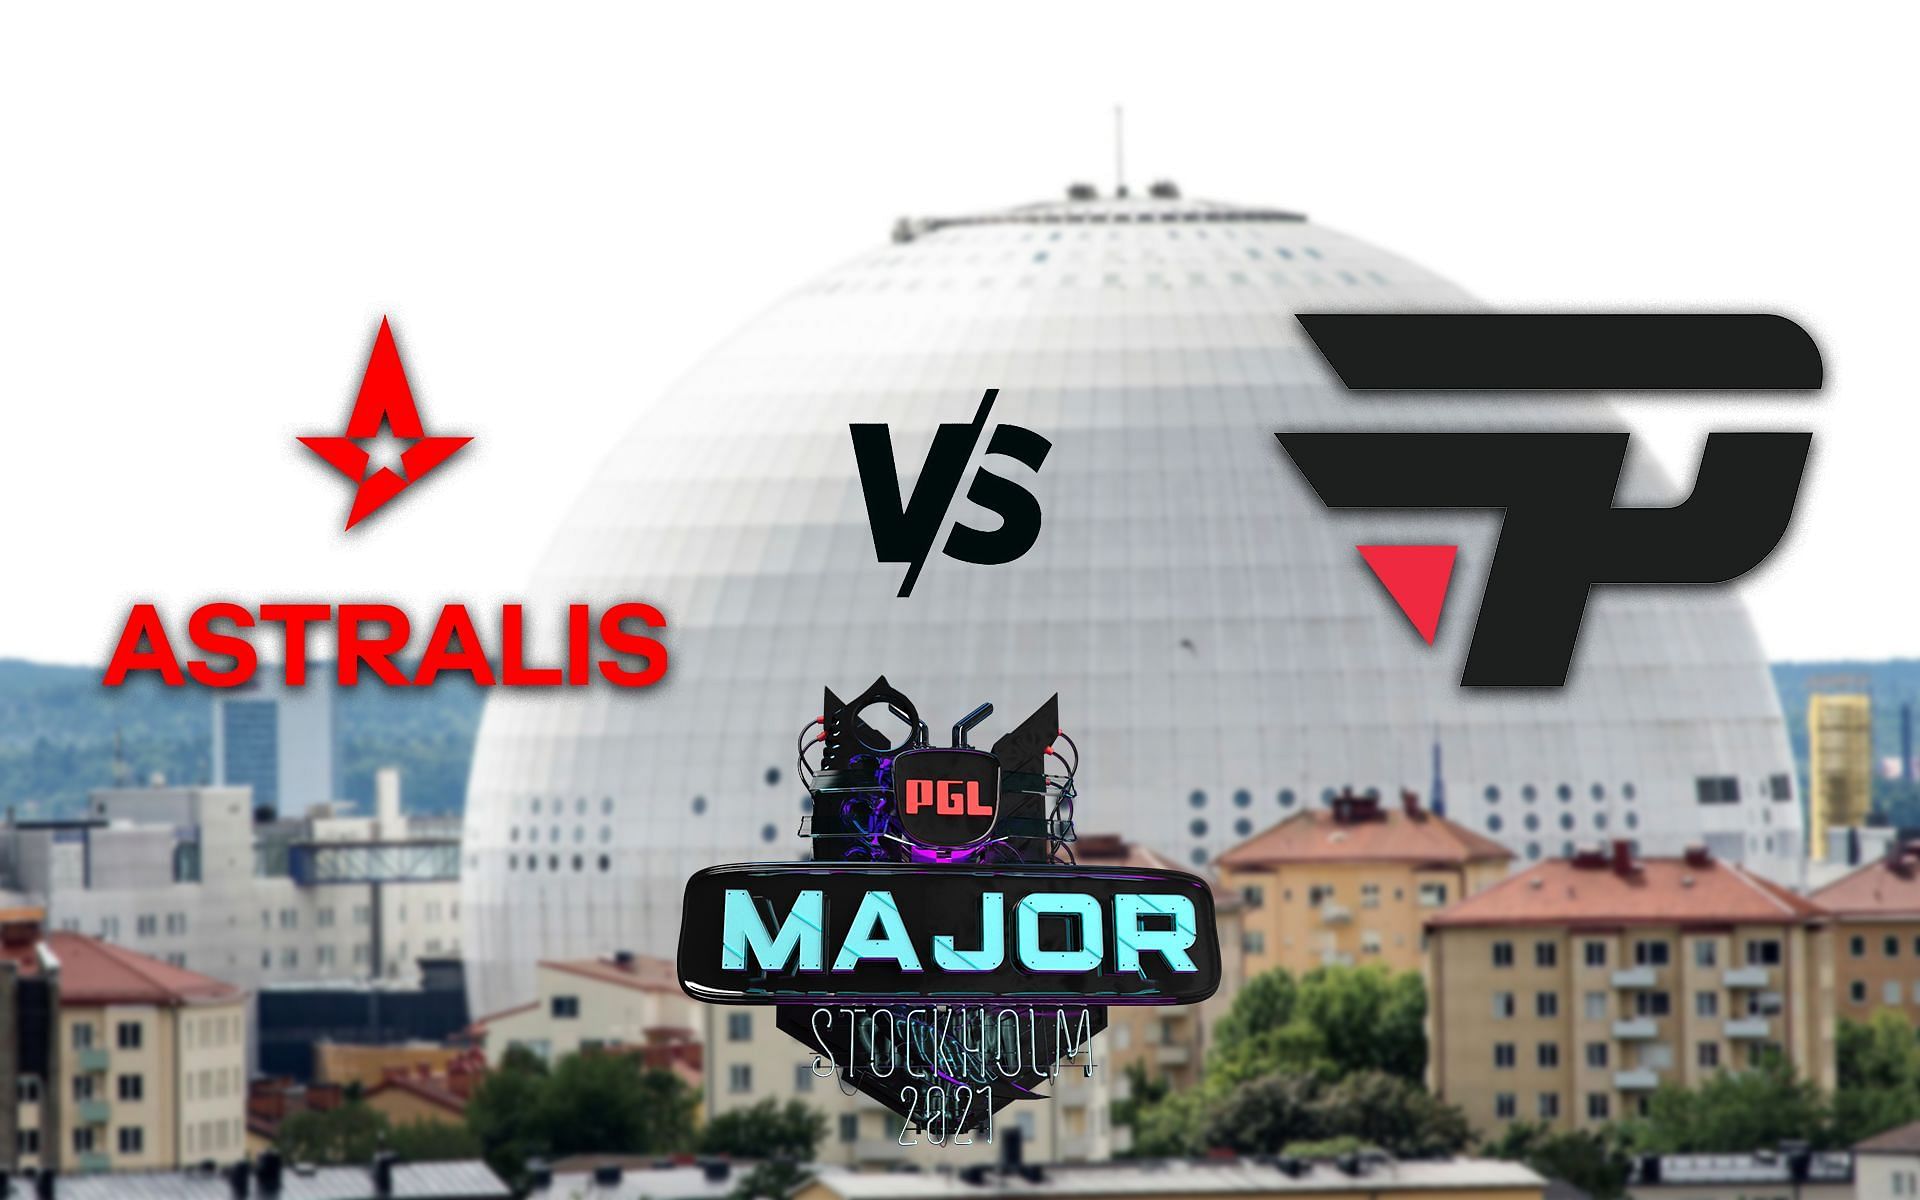 Astralis faces PaiN Gaming in an elimination match